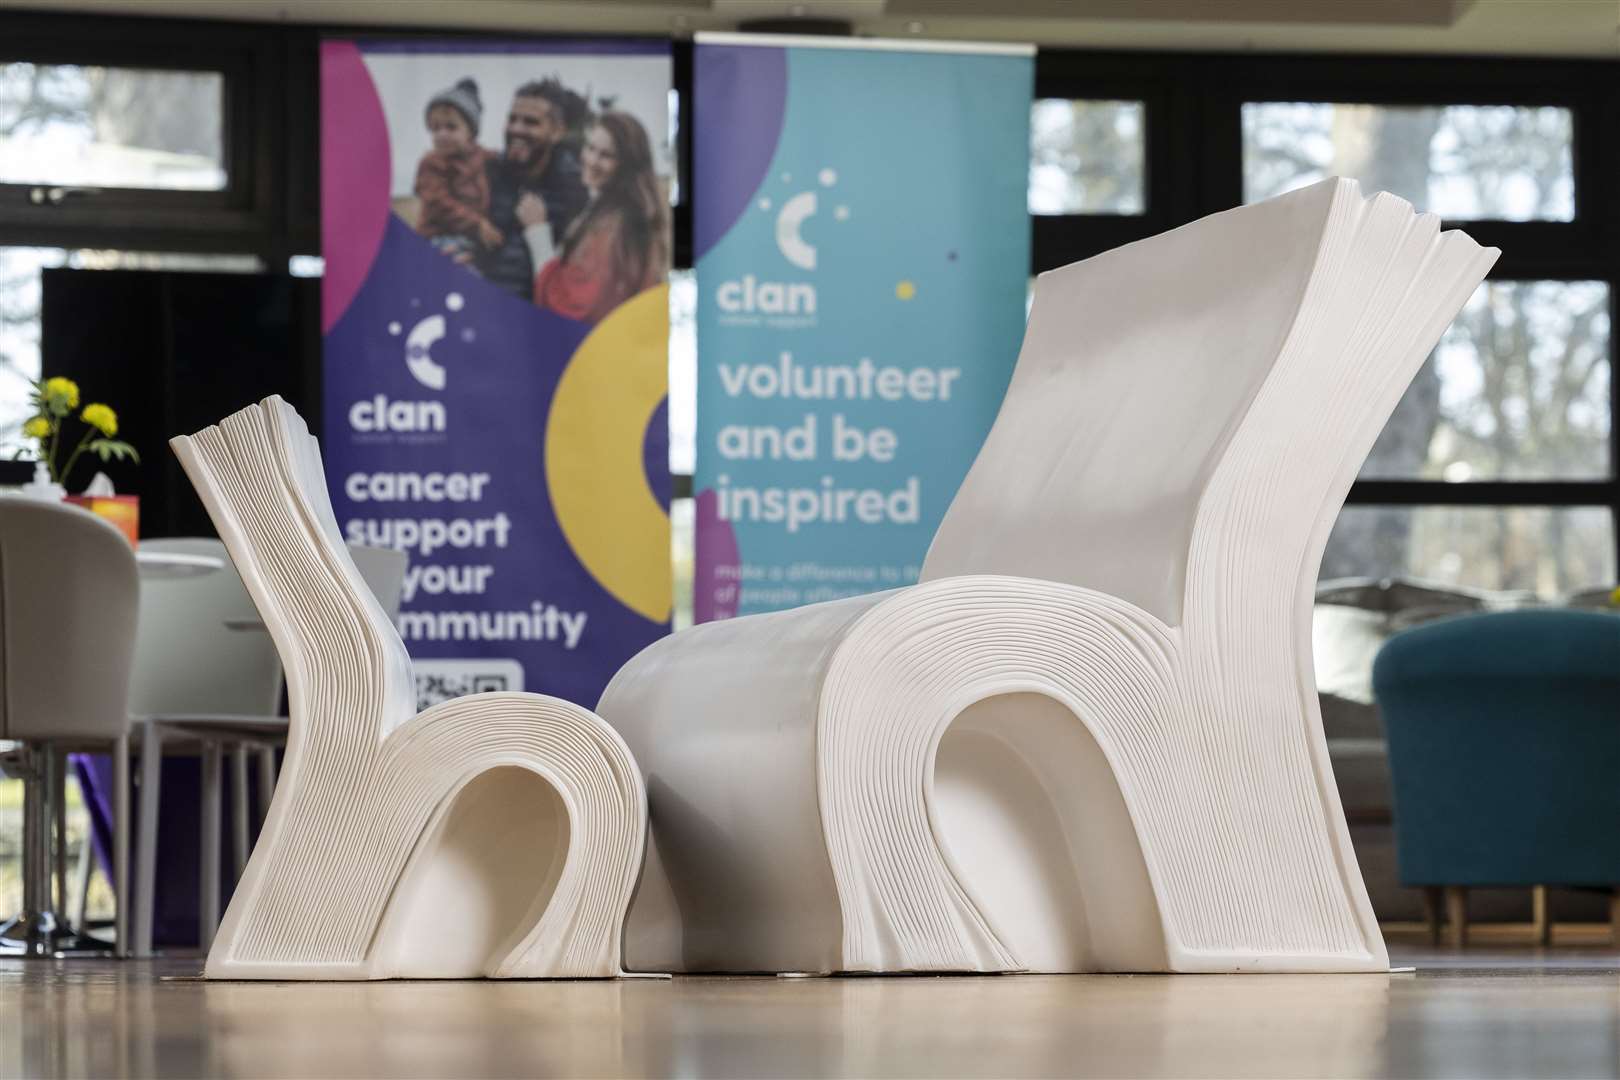 The bookbench sculotures will be available for sponsorship.